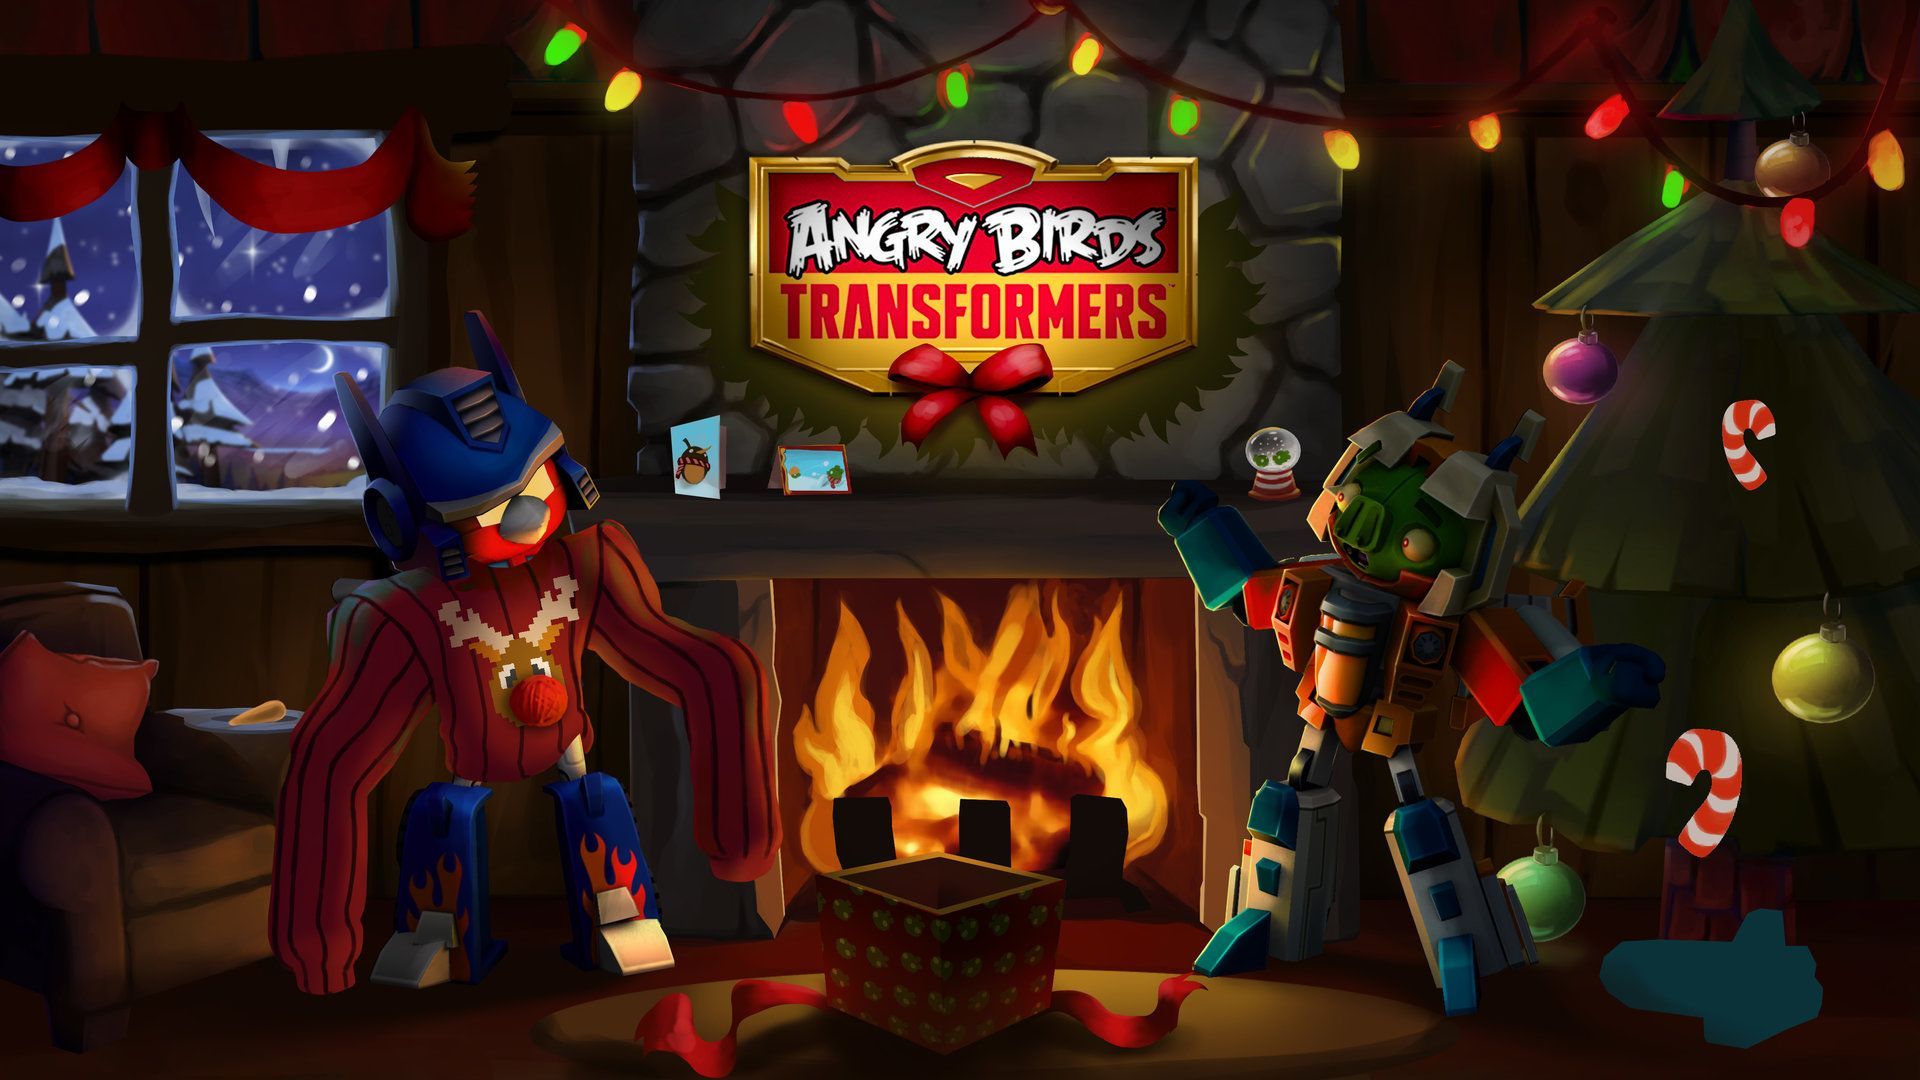 Angry Birds: Transformers Content, Luke Kendall. Angry birds seasons, Angry birds, Bird poster